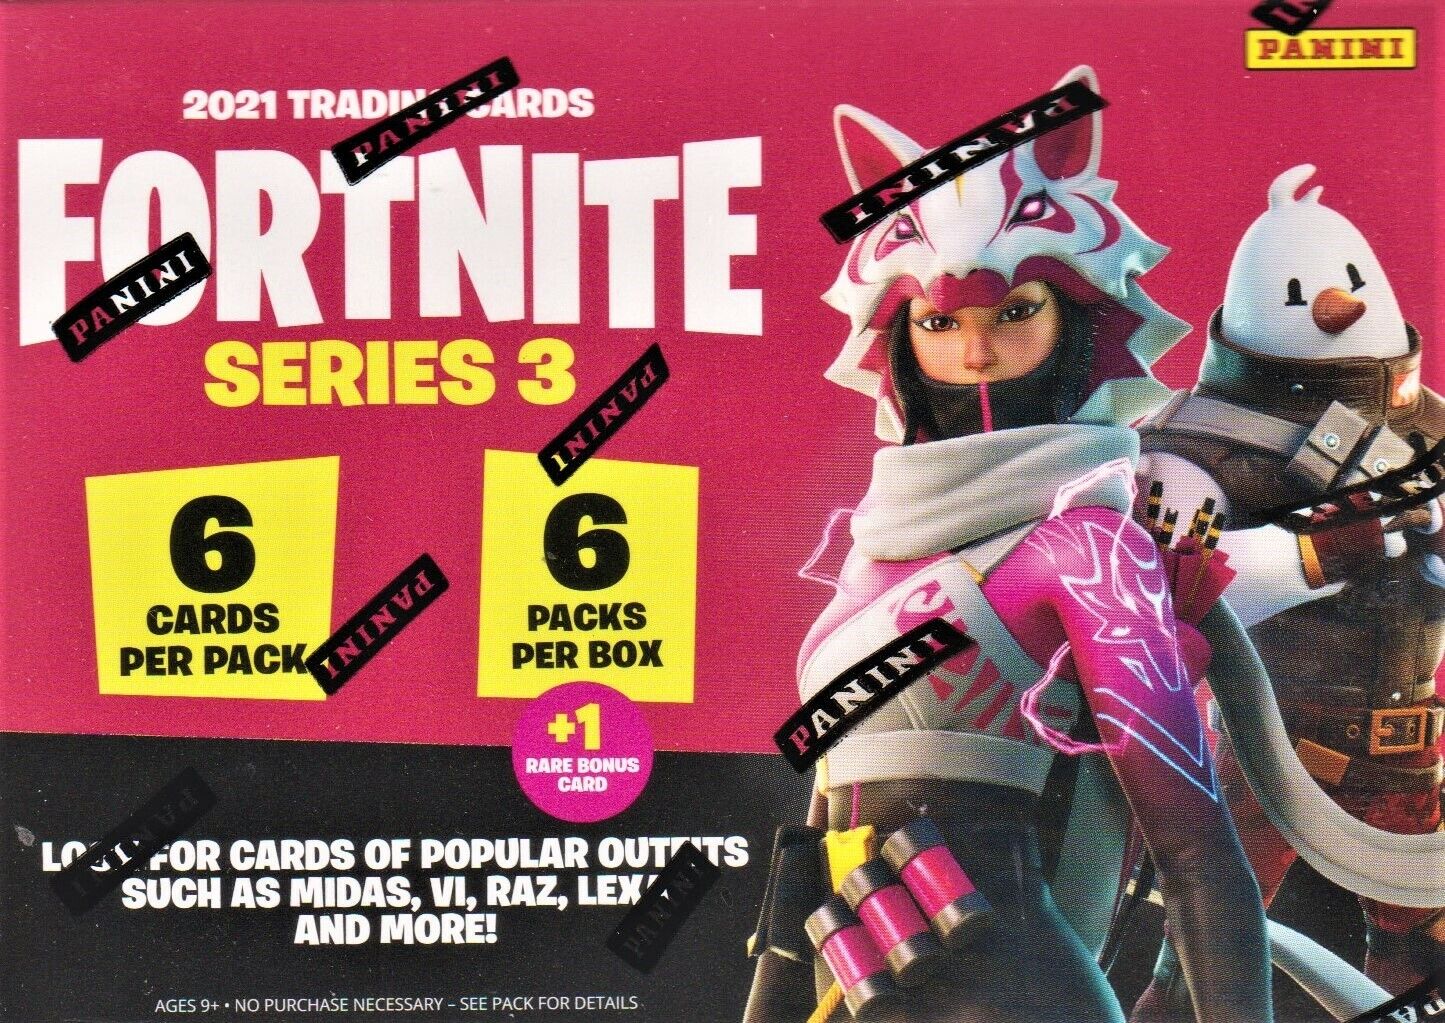 2021 Panini Fortnite Series 3 sealed blaster Box 6 packs containing 6 cards each